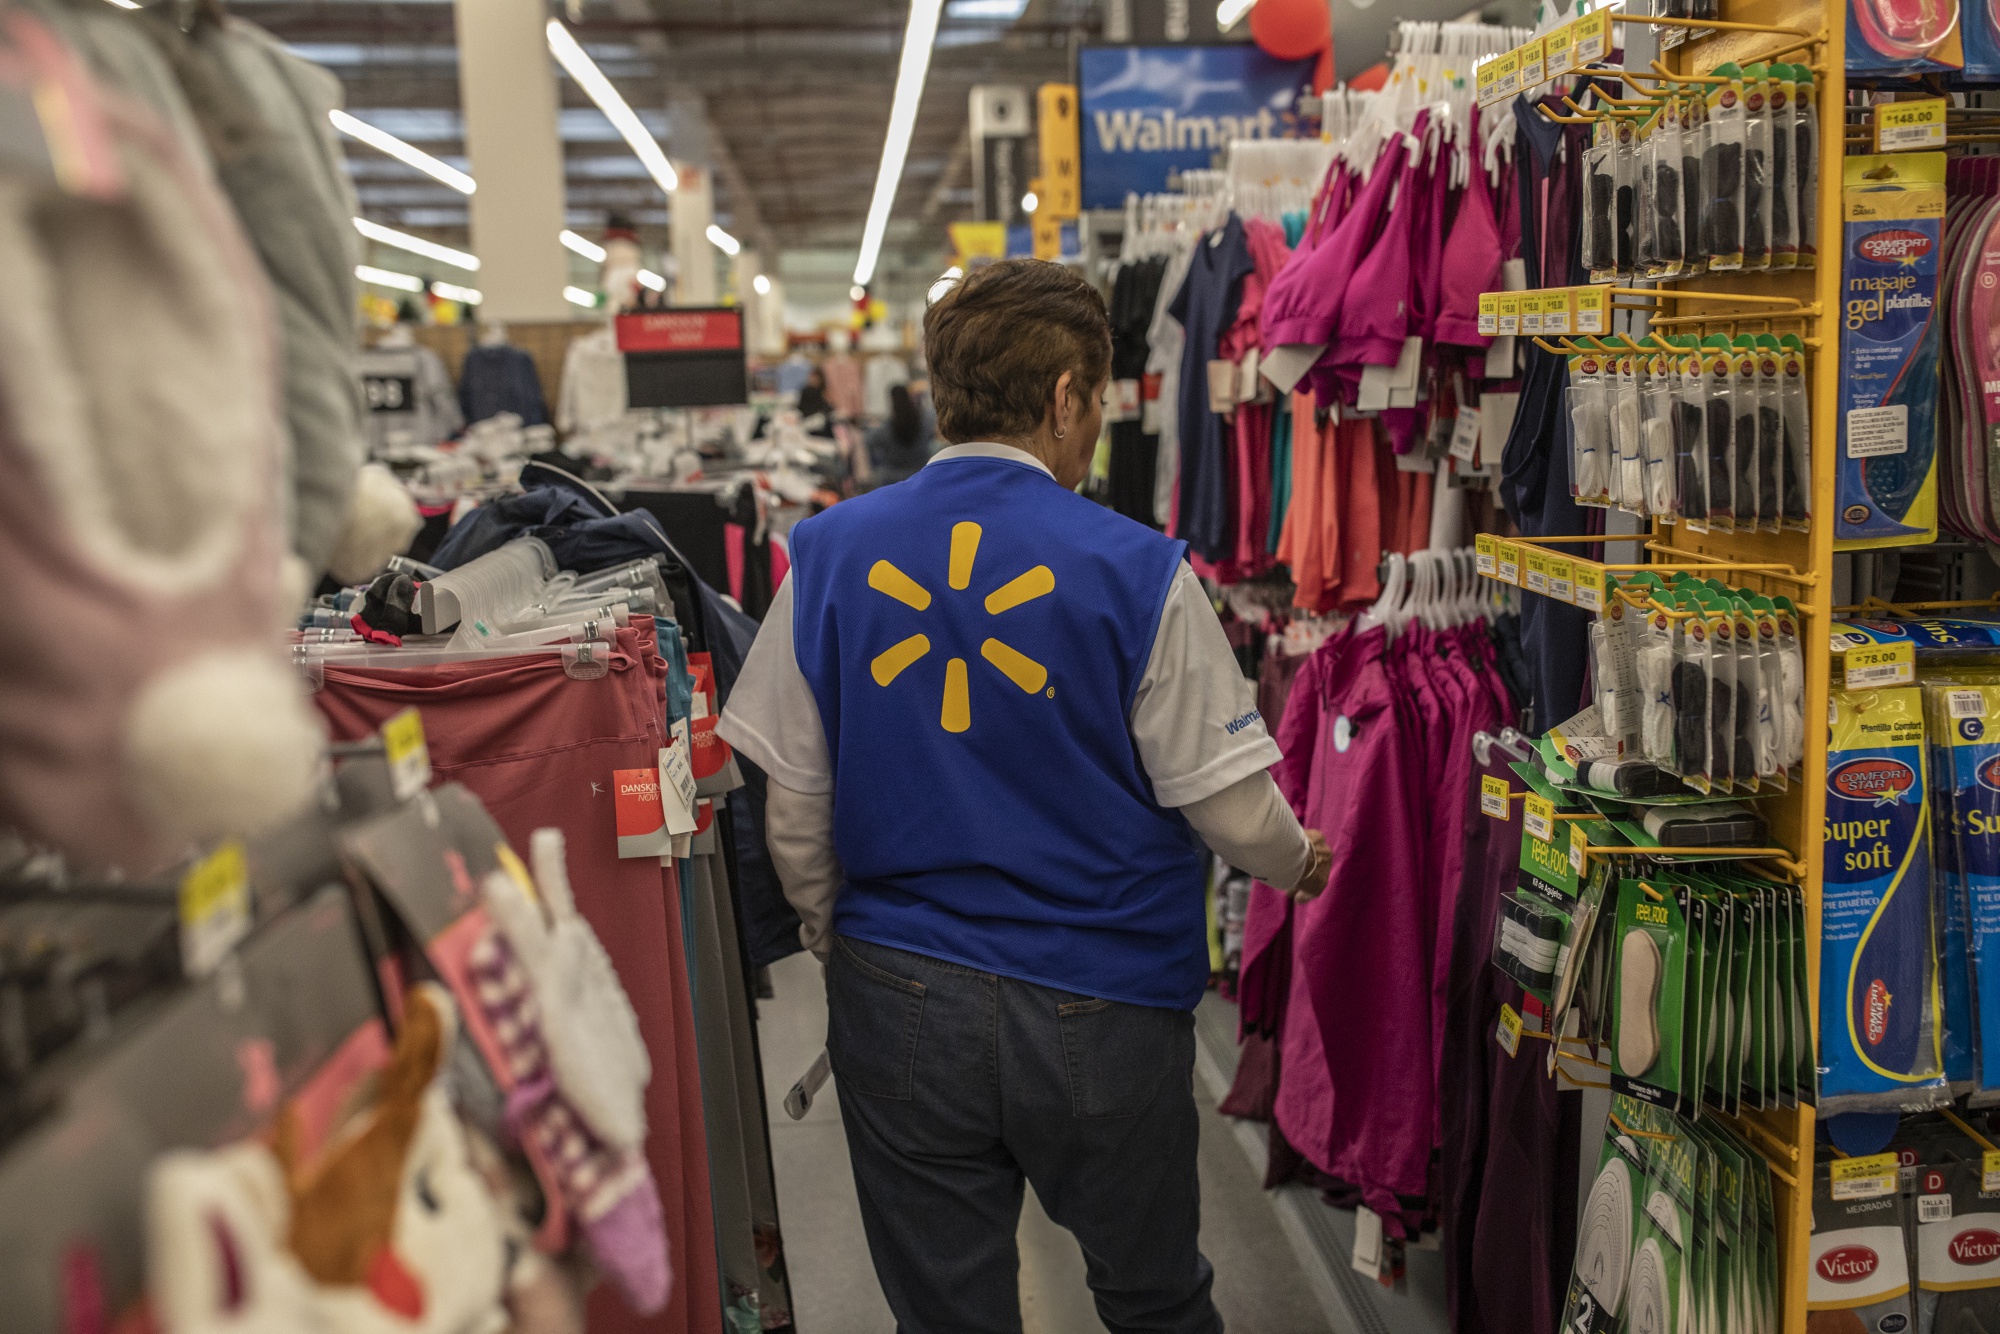 Walmart Has Designed Inclusive Vests for Store-Level Employees